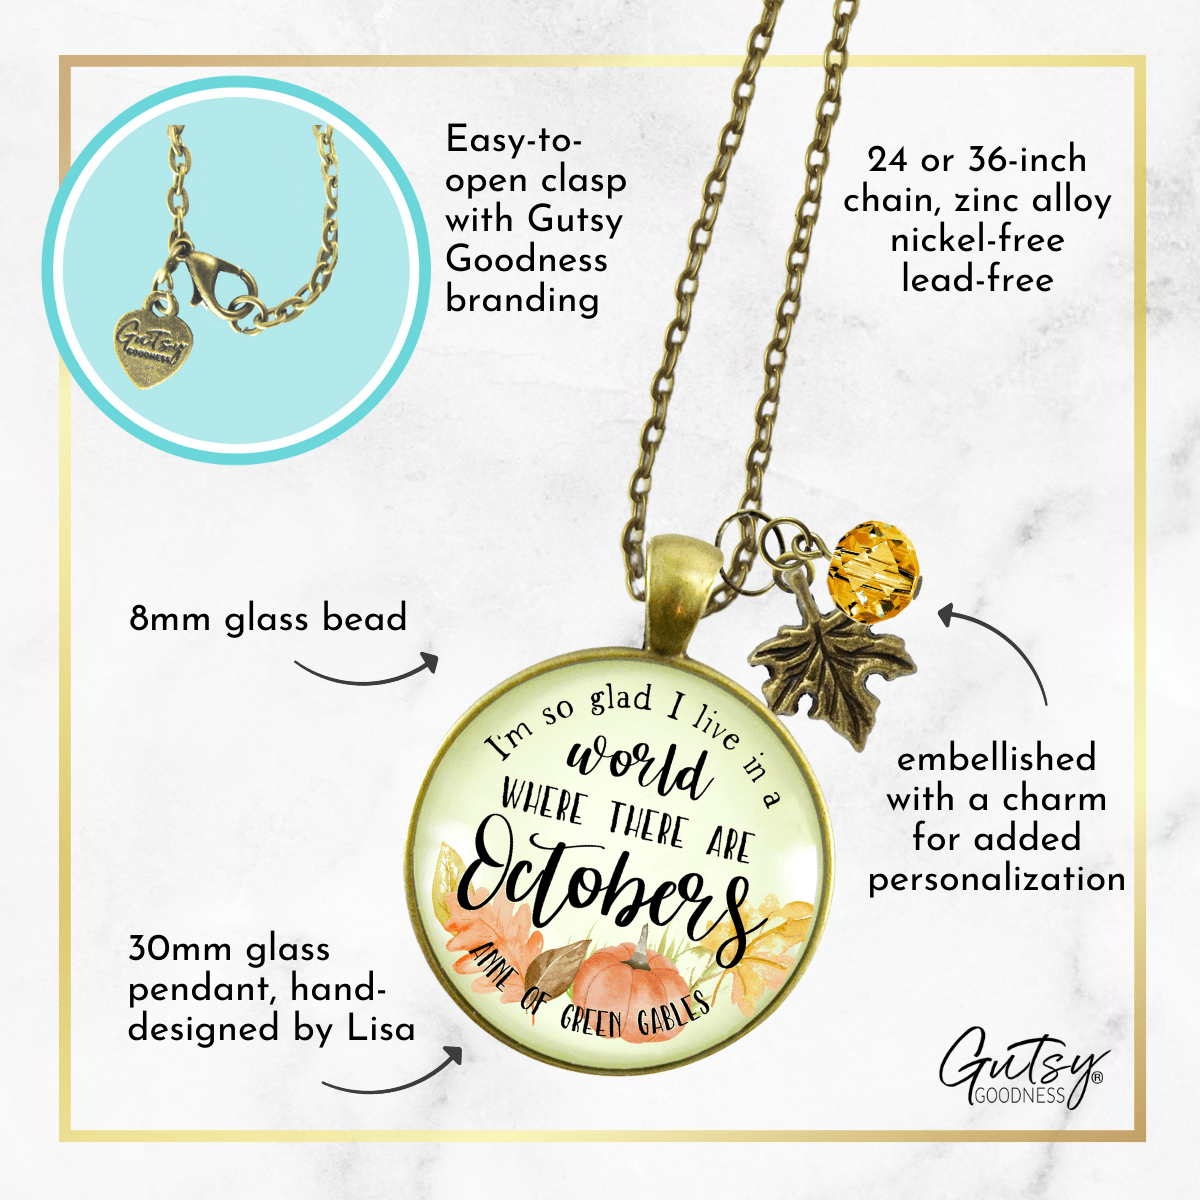 Gutsy Goodness I'm So Glad I Live World Octobers Necklace Autumn Quote Jewelry - Gutsy Goodness Handmade Jewelry;I'm So Glad I Live World Octobers Necklace Autumn Quote Jewelry - Gutsy Goodness Handmade Jewelry Gifts